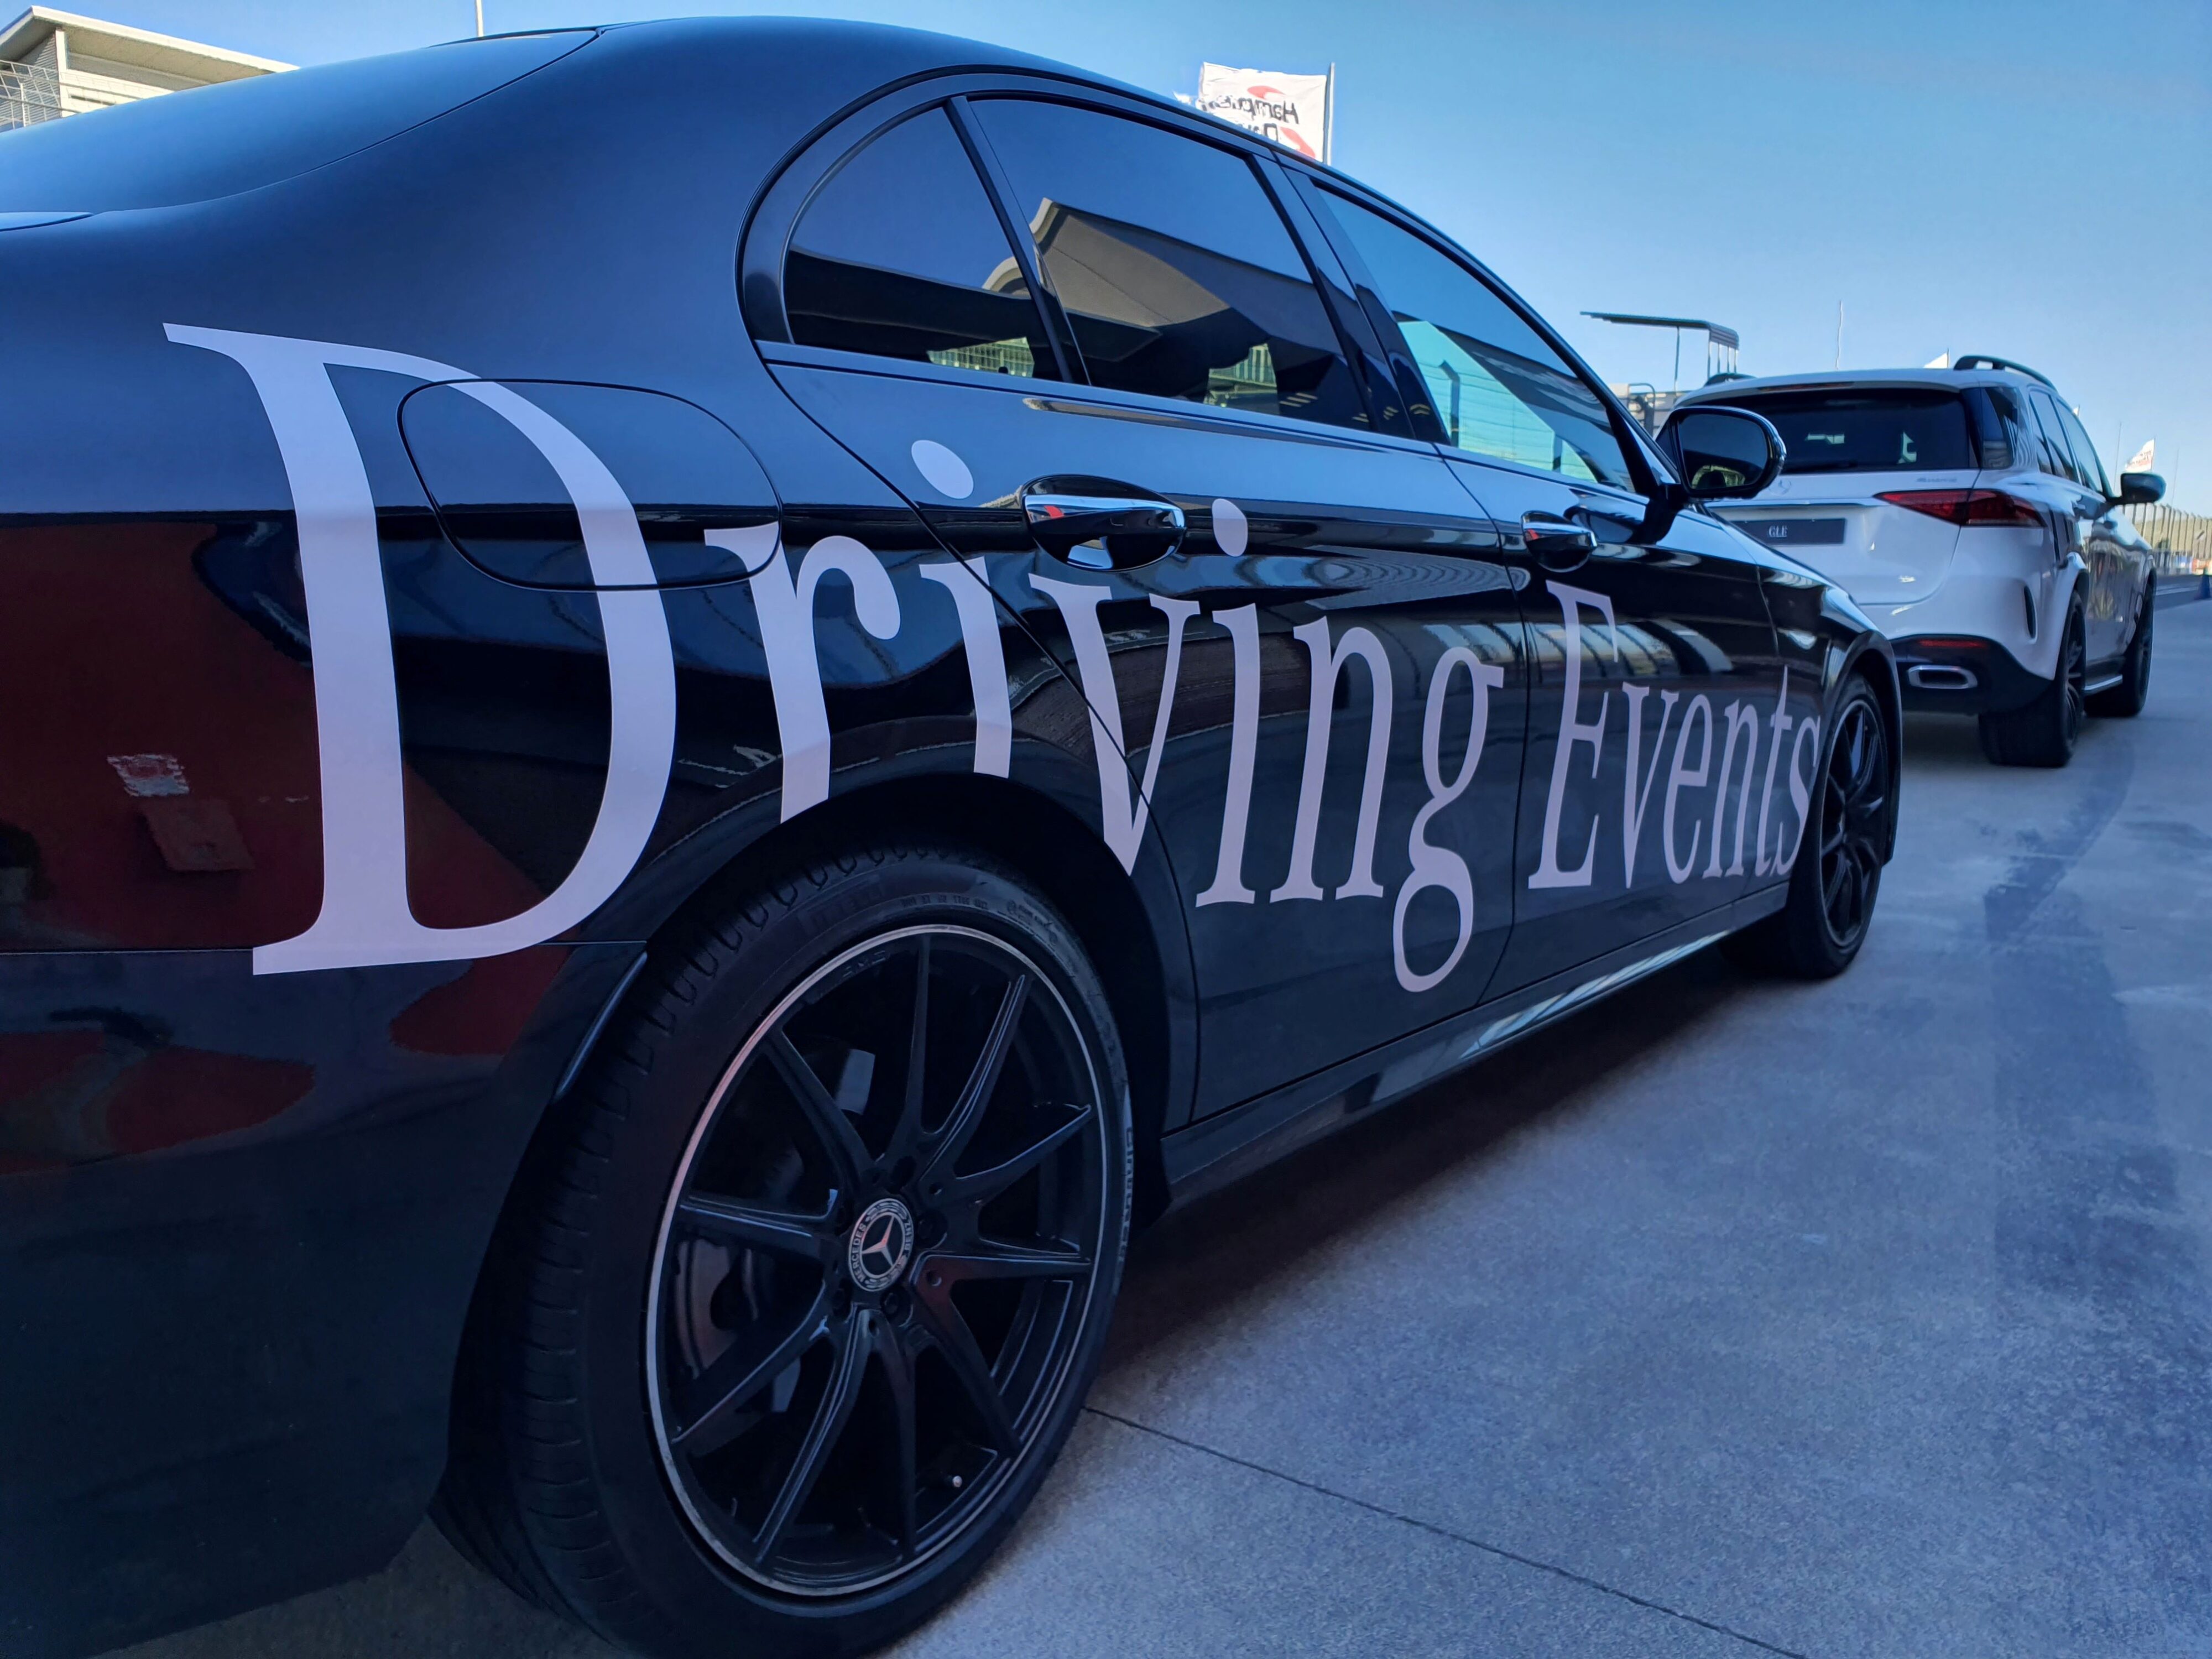 A close-up of the 'Driving Events' livery on the side of a Mercedes-Benz E-Class sedan.